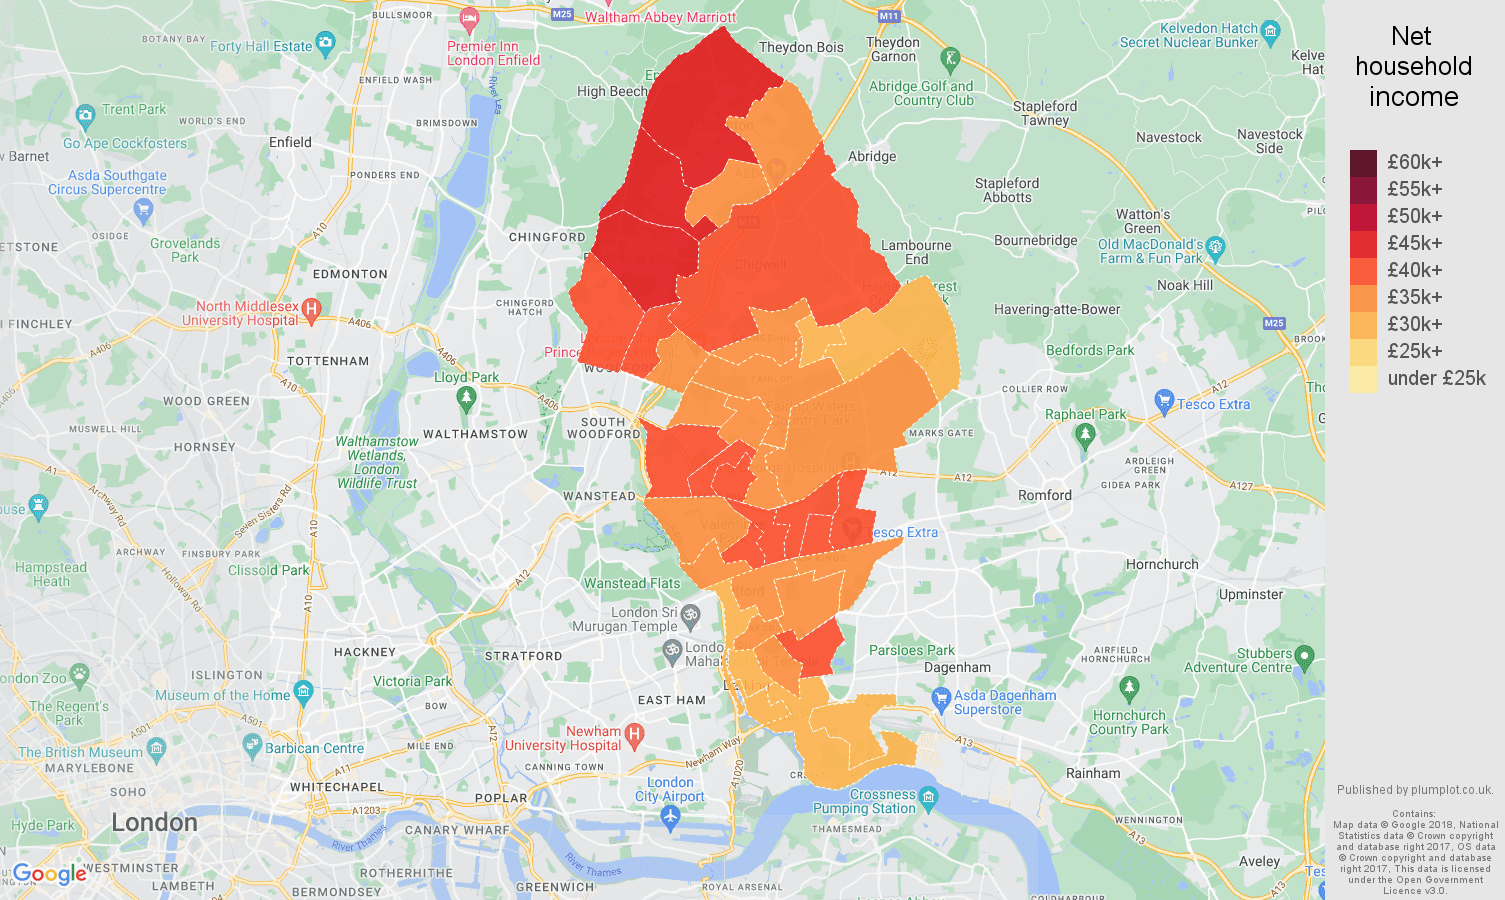 Ilford net household income map